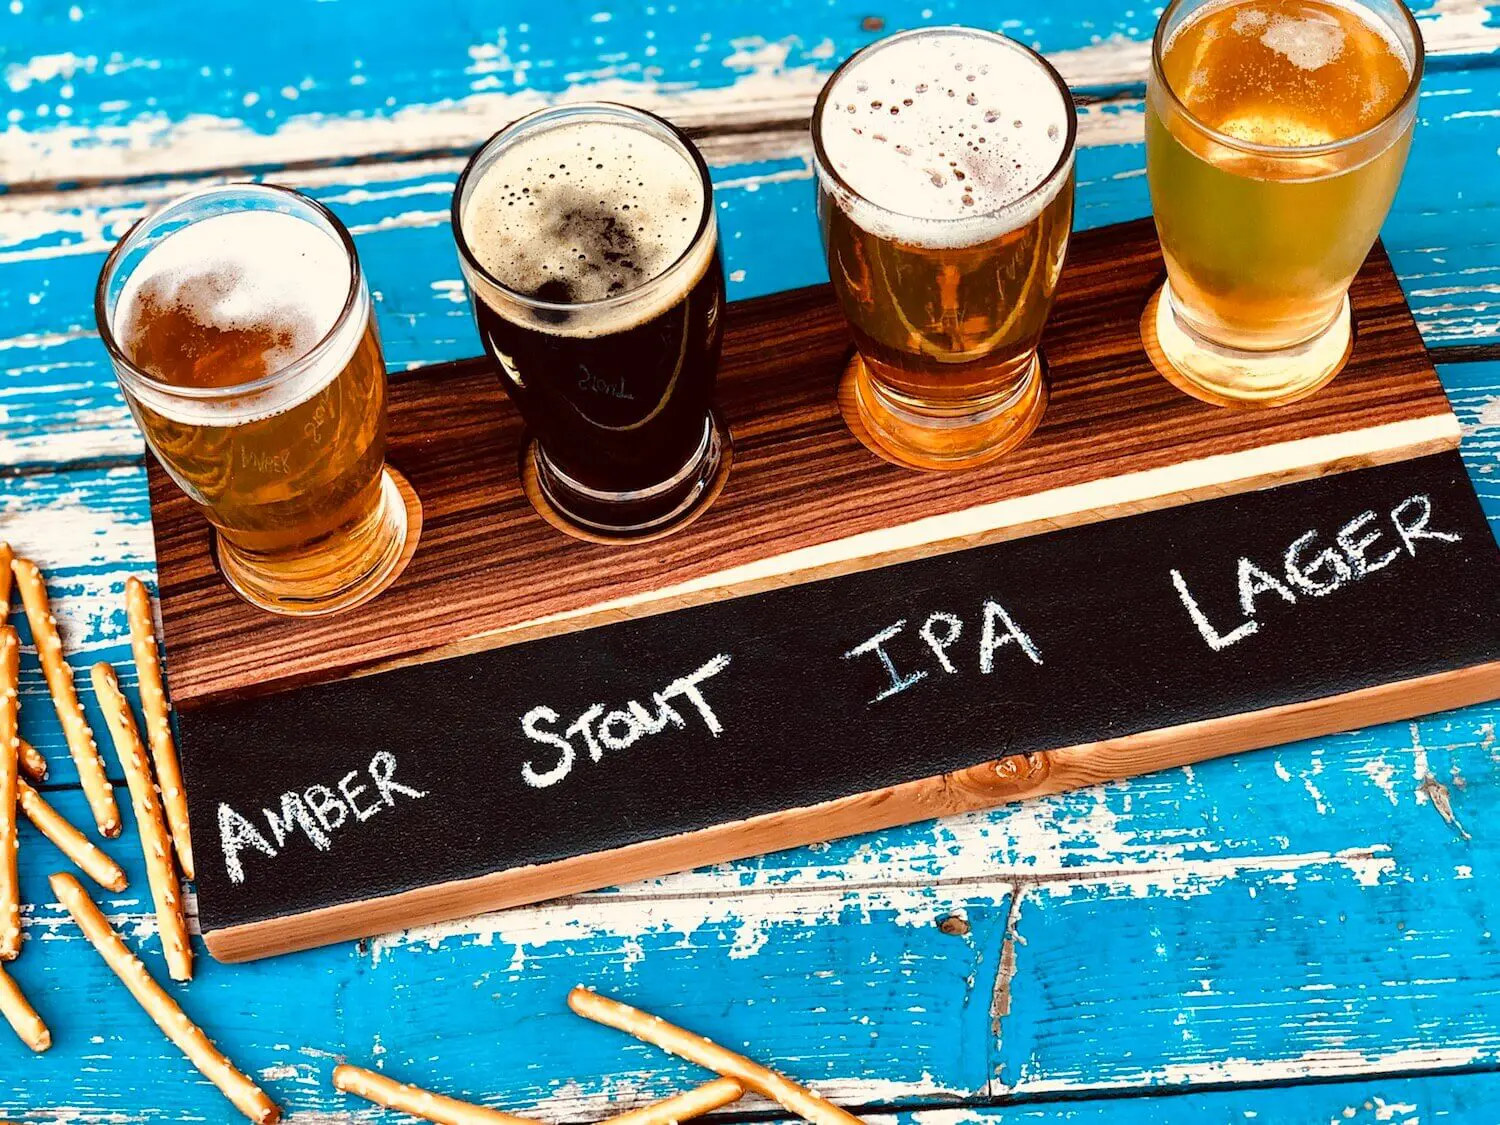 https://www.homejelly.com/wp-content/uploads/2019/03/Beer-flights-tasting-tray-feature-photo.jpg